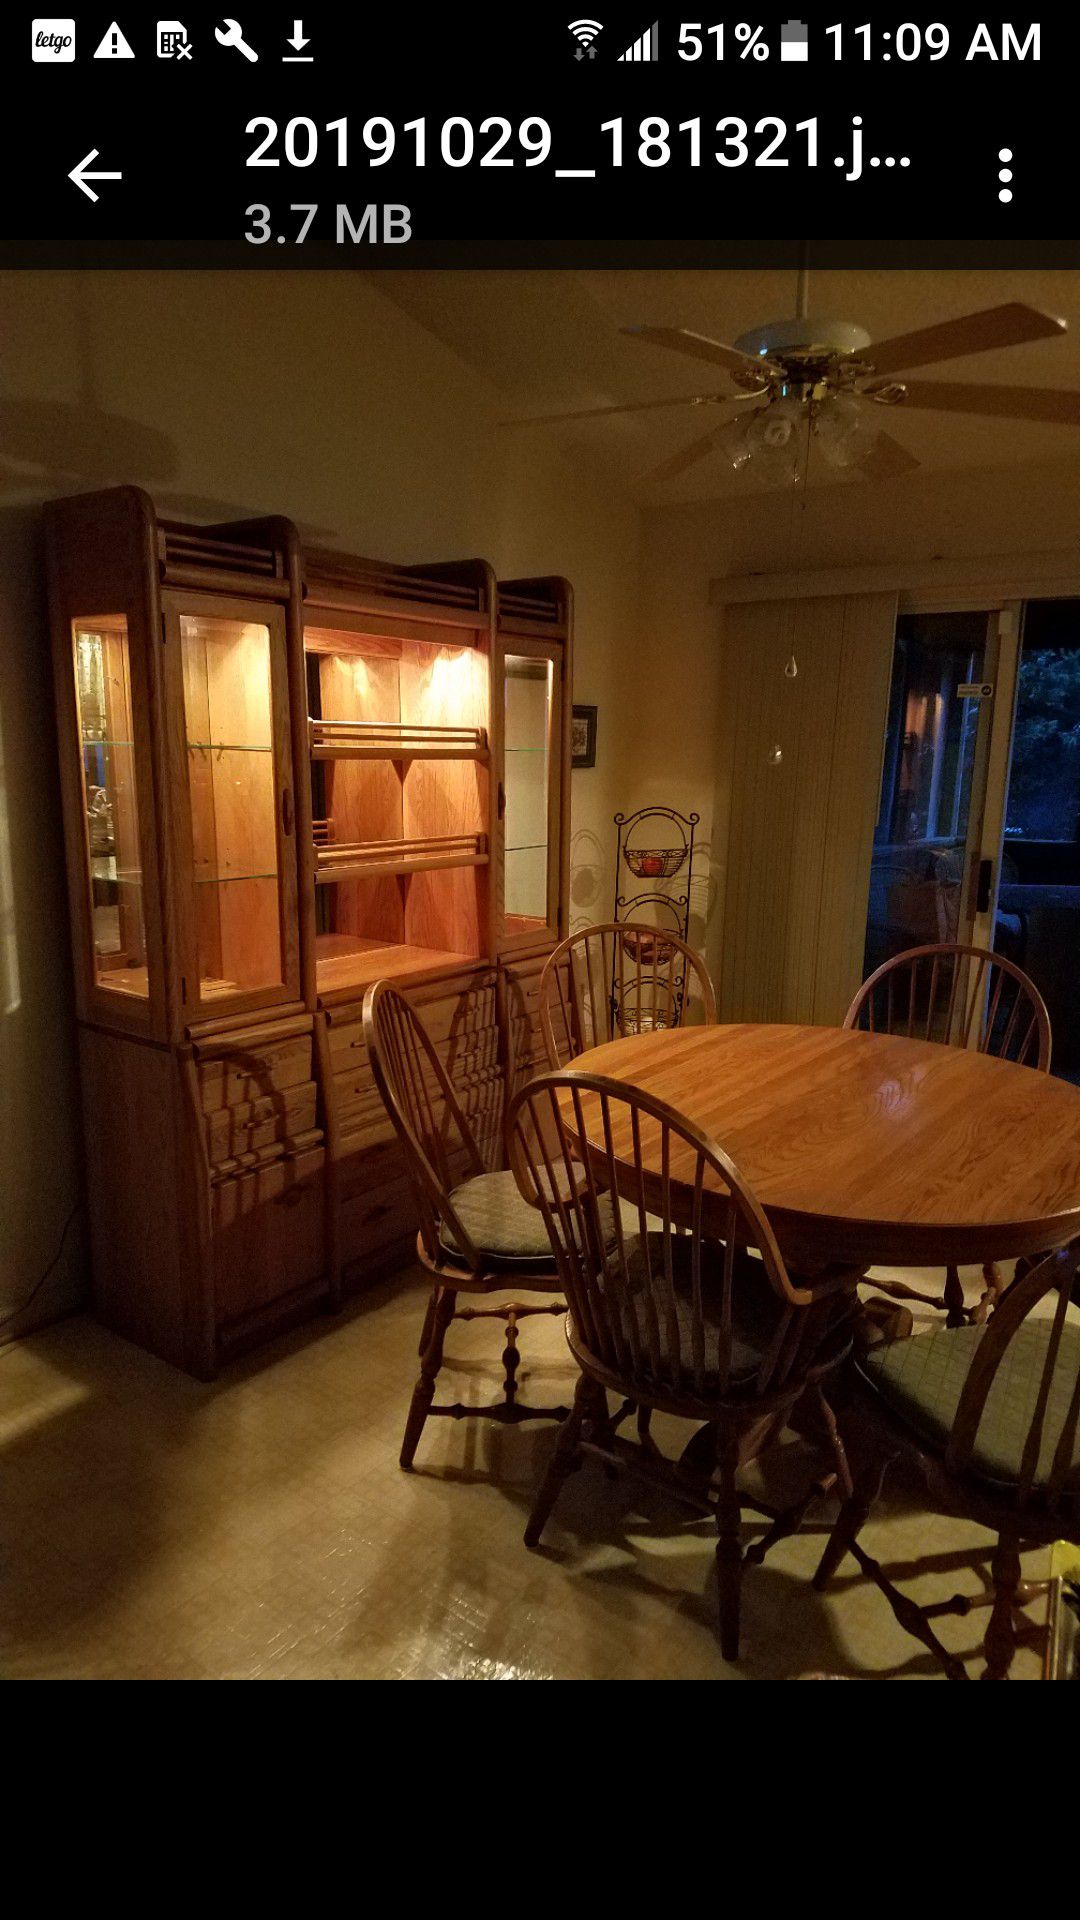 Hutch and dining table